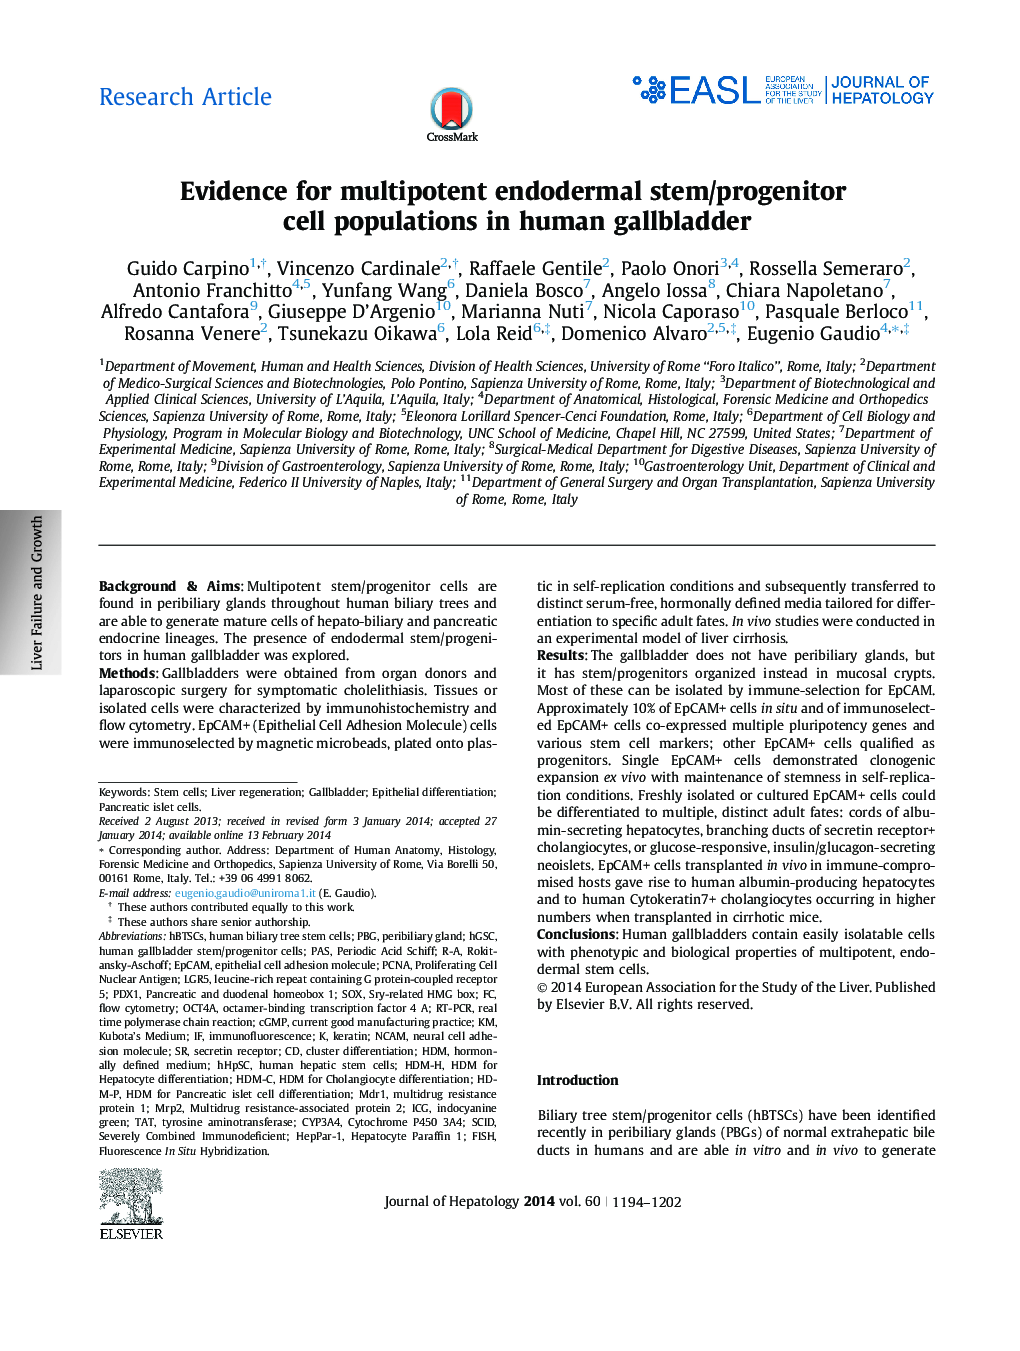 Research ArticleEvidence for multipotent endodermal stem/progenitor cell populations in human gallbladder